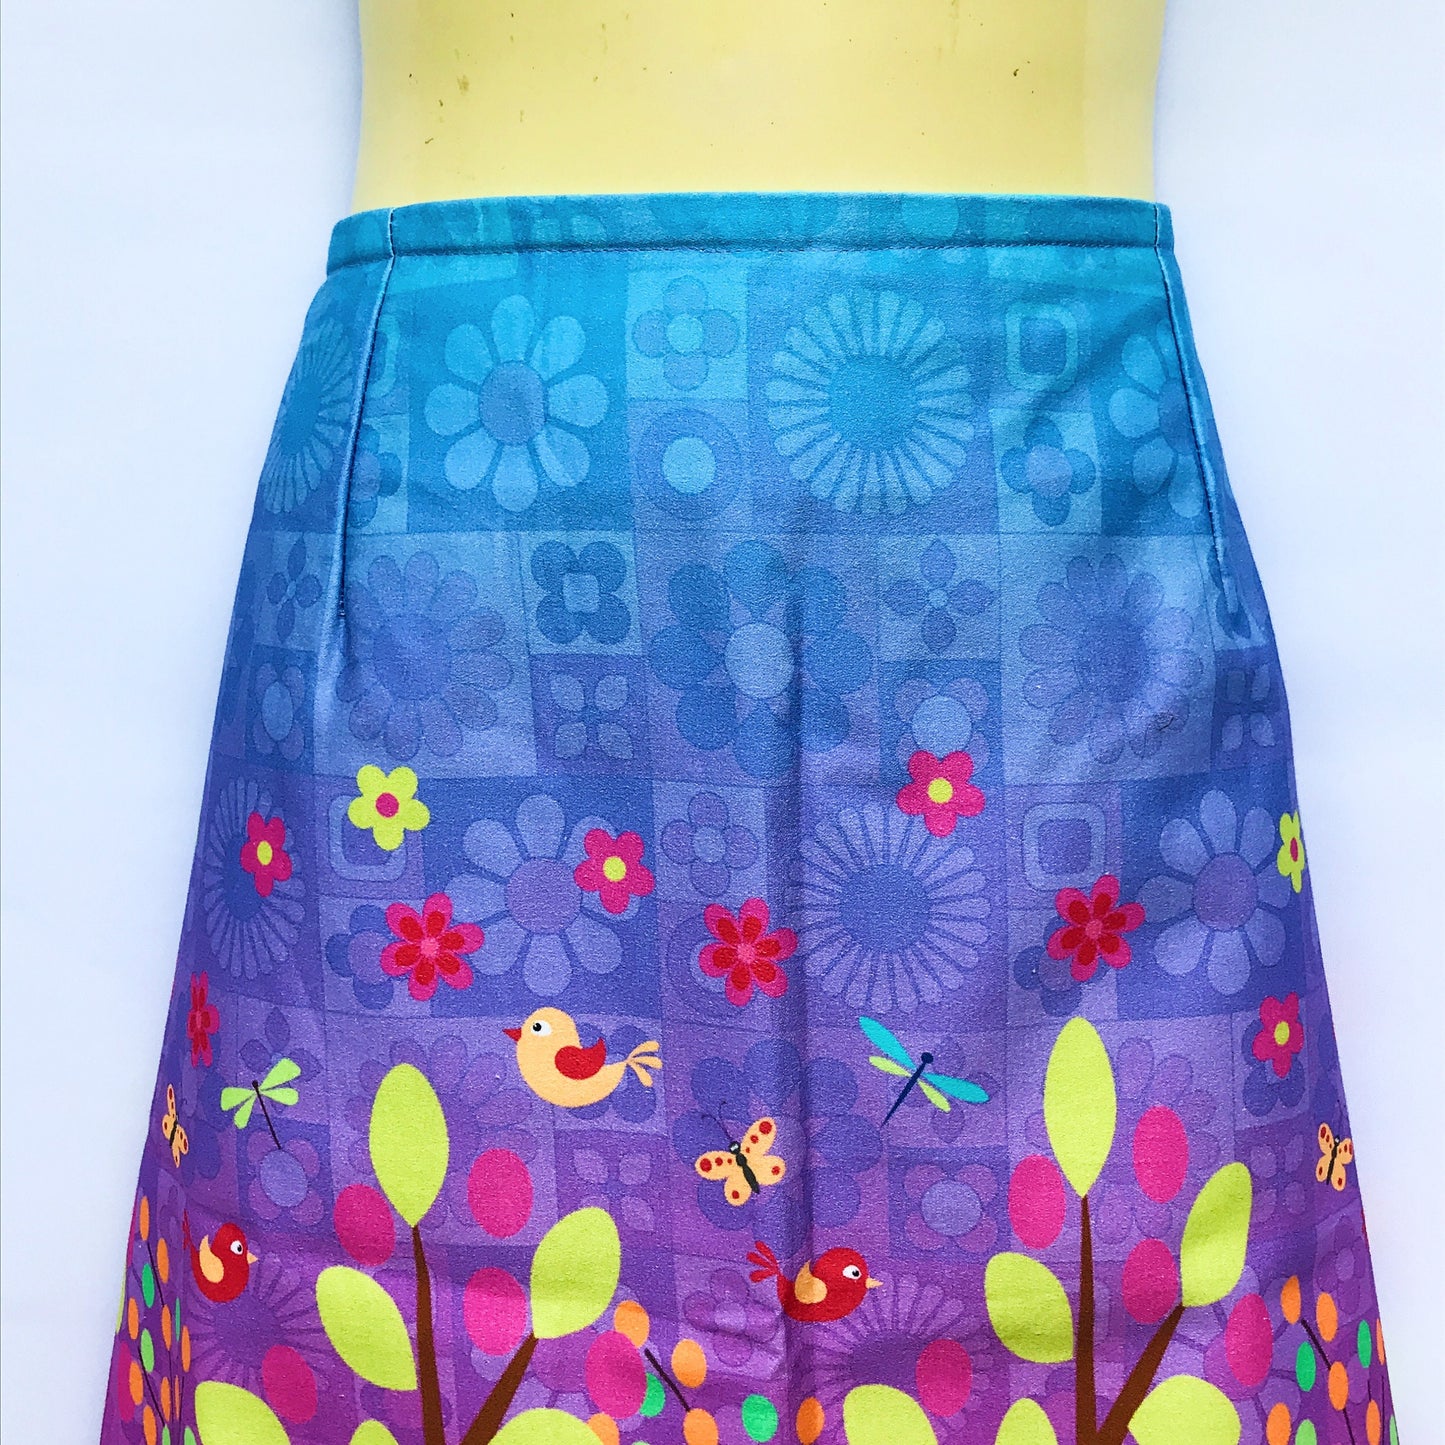 Ladies A-line Skirt - woodland animals - sizes 8 -24 avail